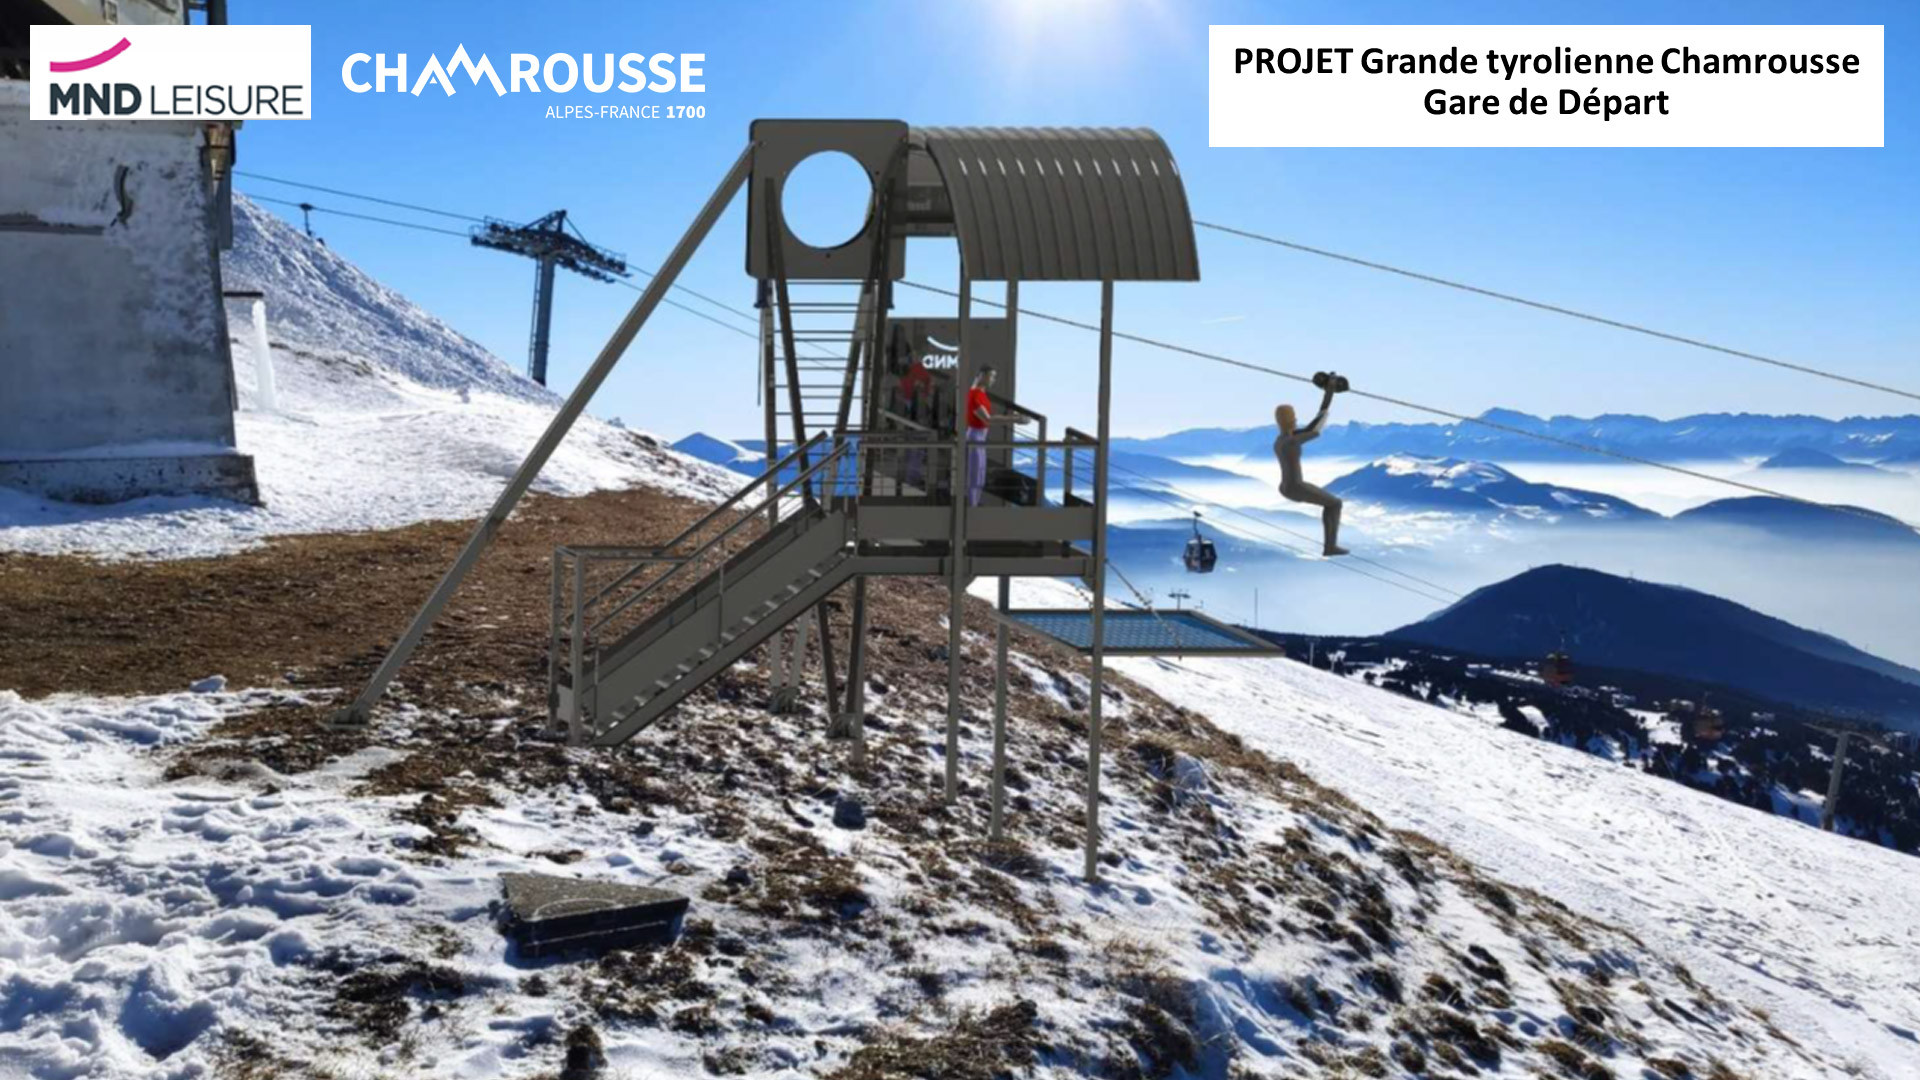 Chamrousse zip line project mountain ski resort grenoble isère french alps france